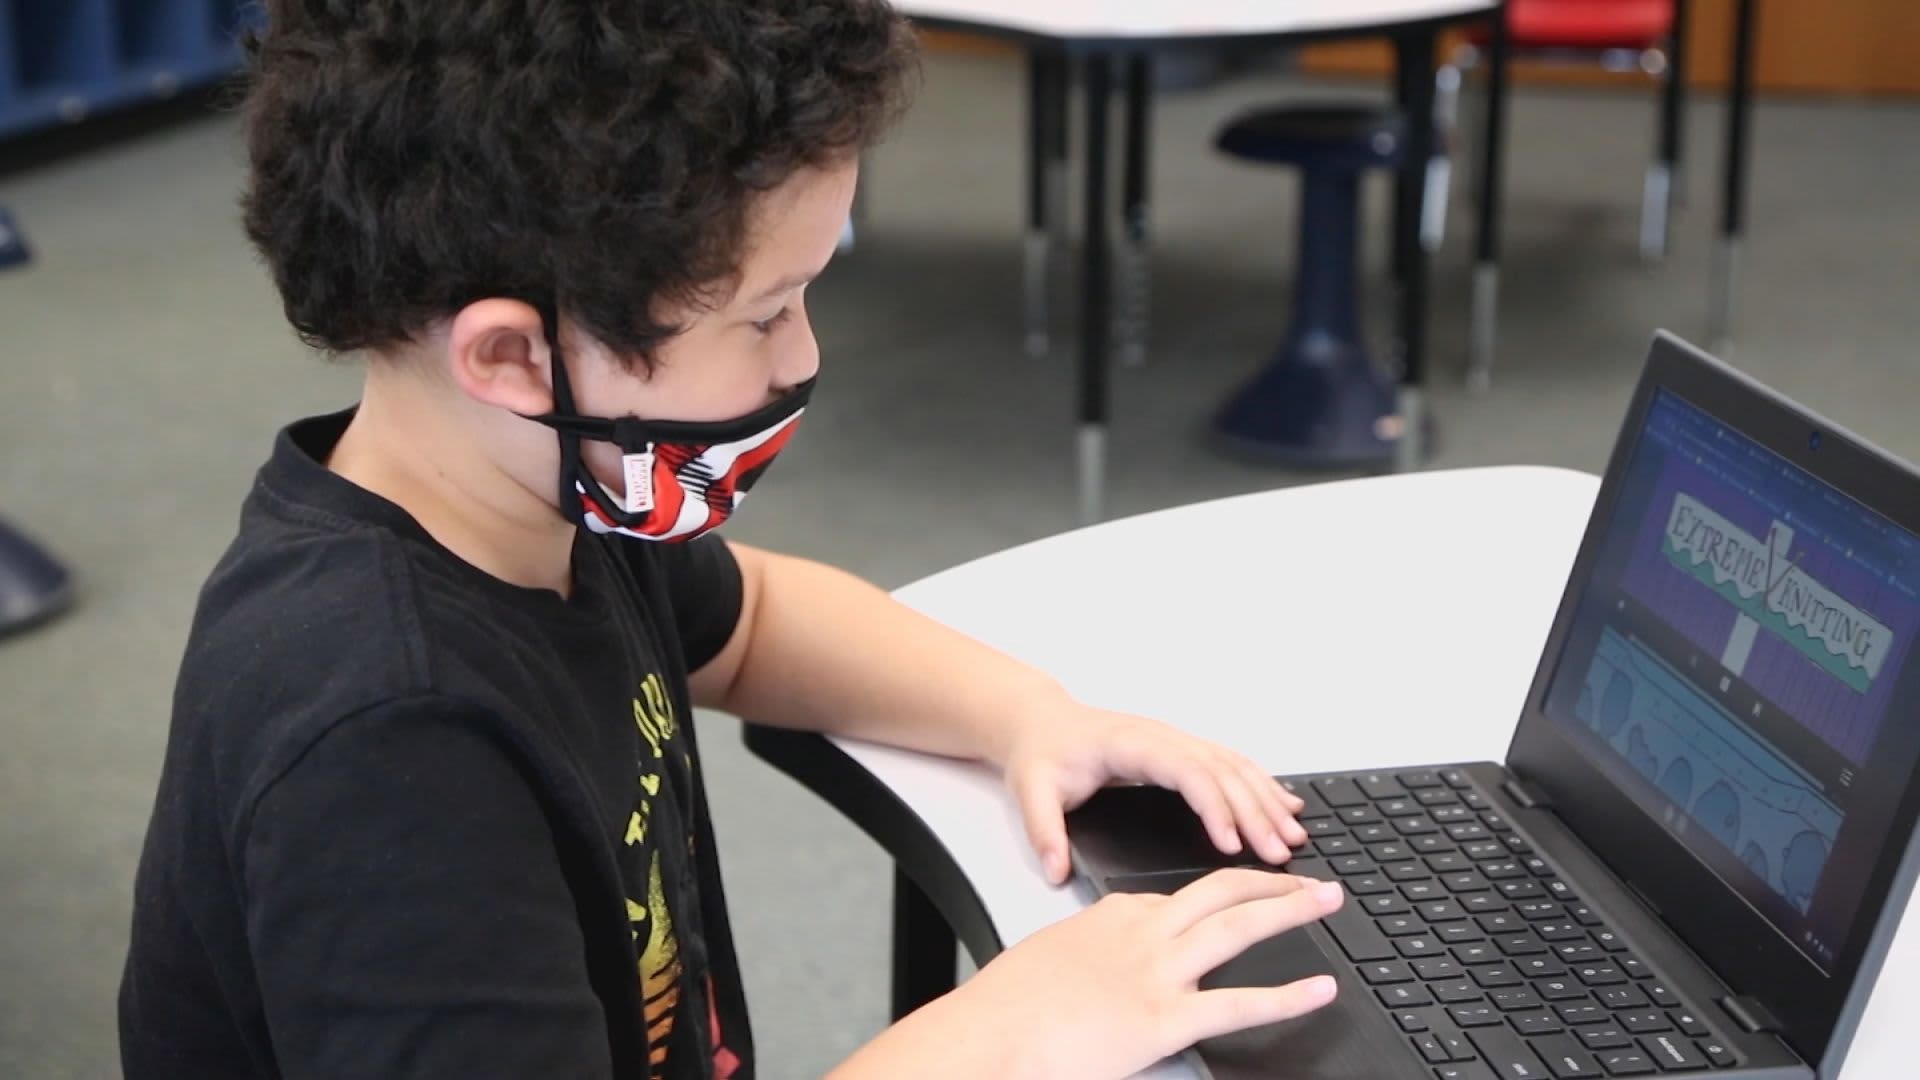 9-year-old student Roberto Nieves Fernandez studies personal finance topics on his laptop using online resource center SmartPath.